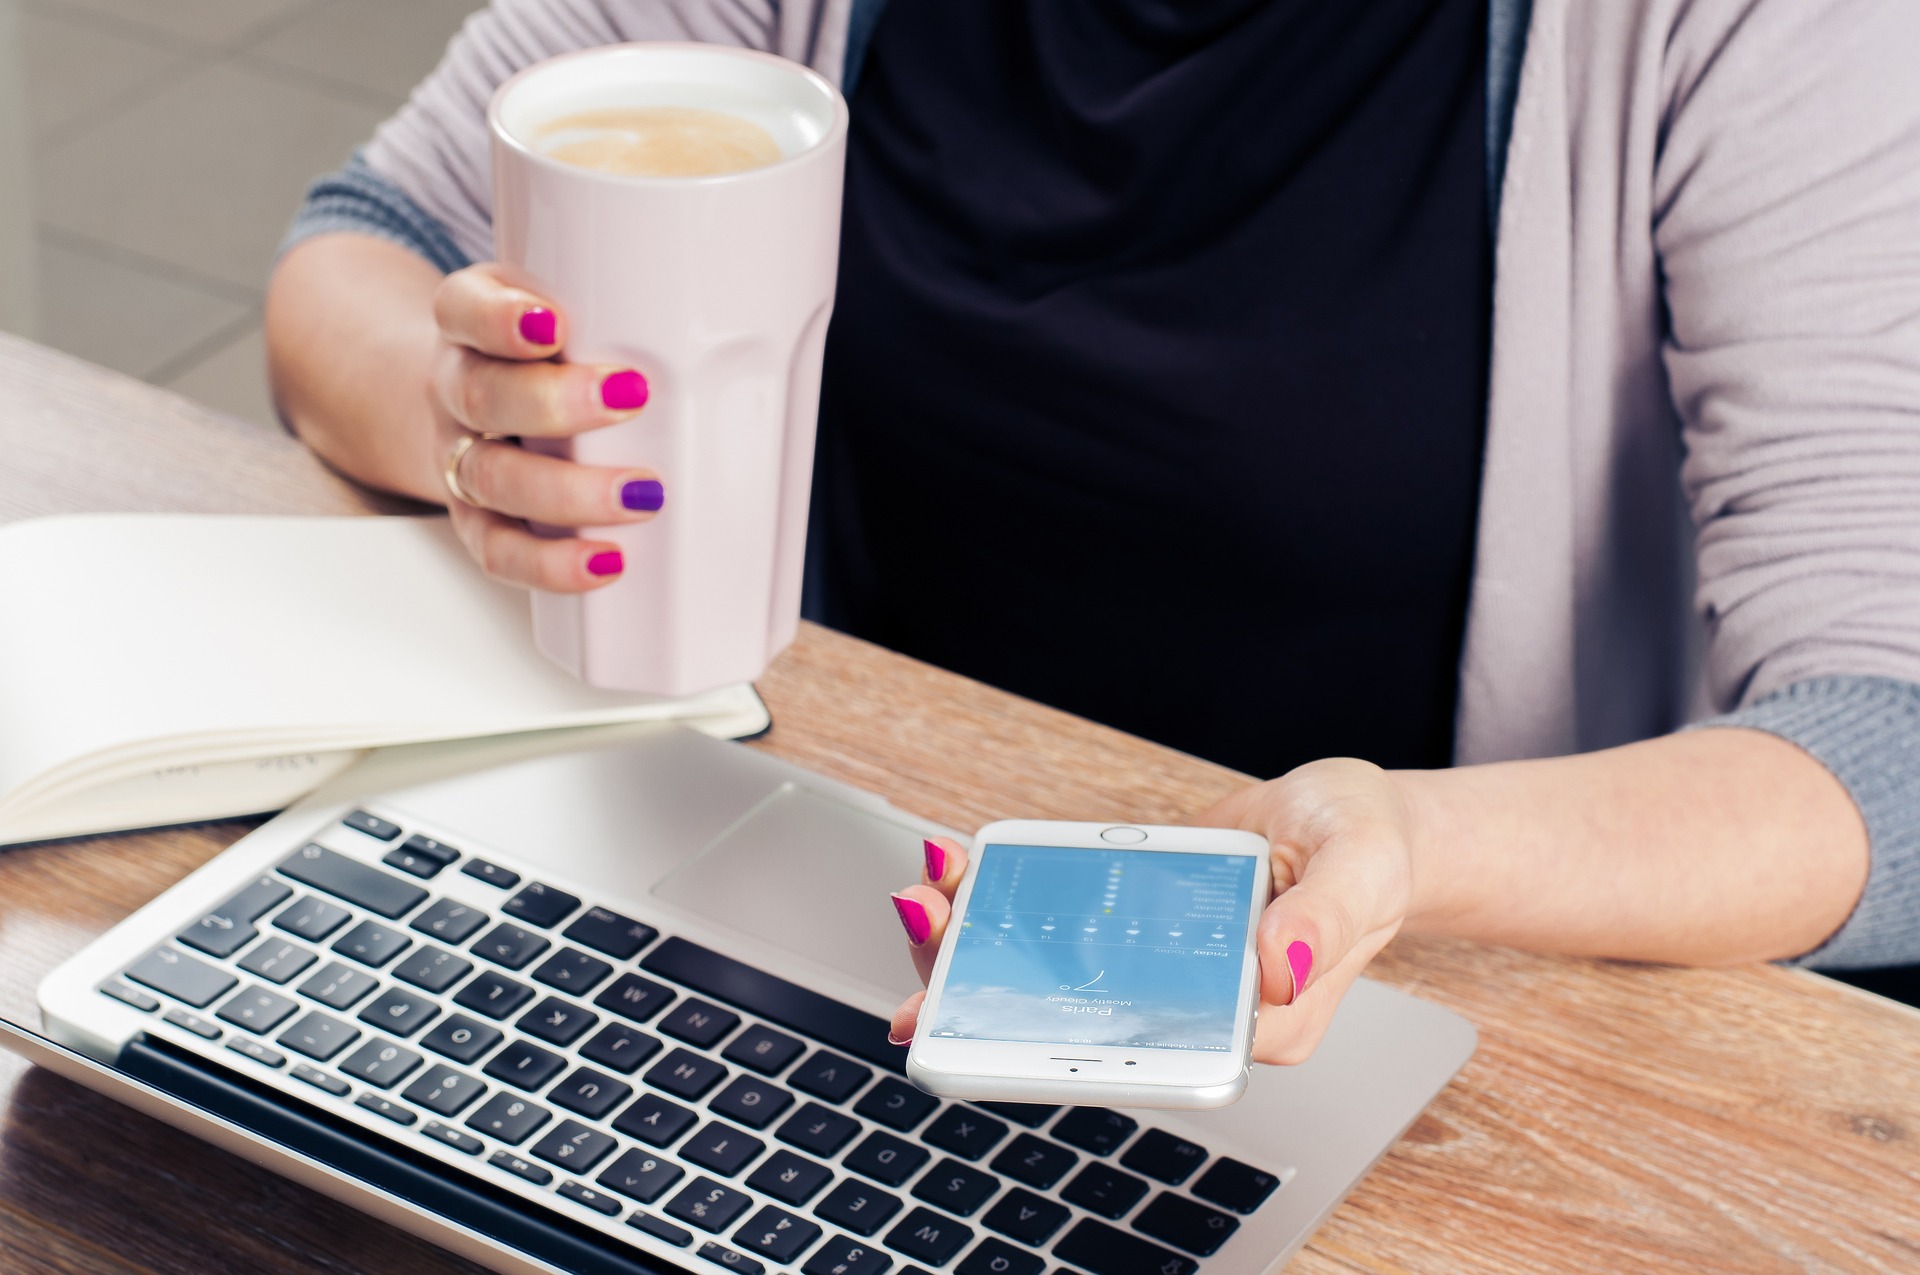 A person with red and purple painted nails sits at an open laptop while holding a cell phone and a cup of coffee